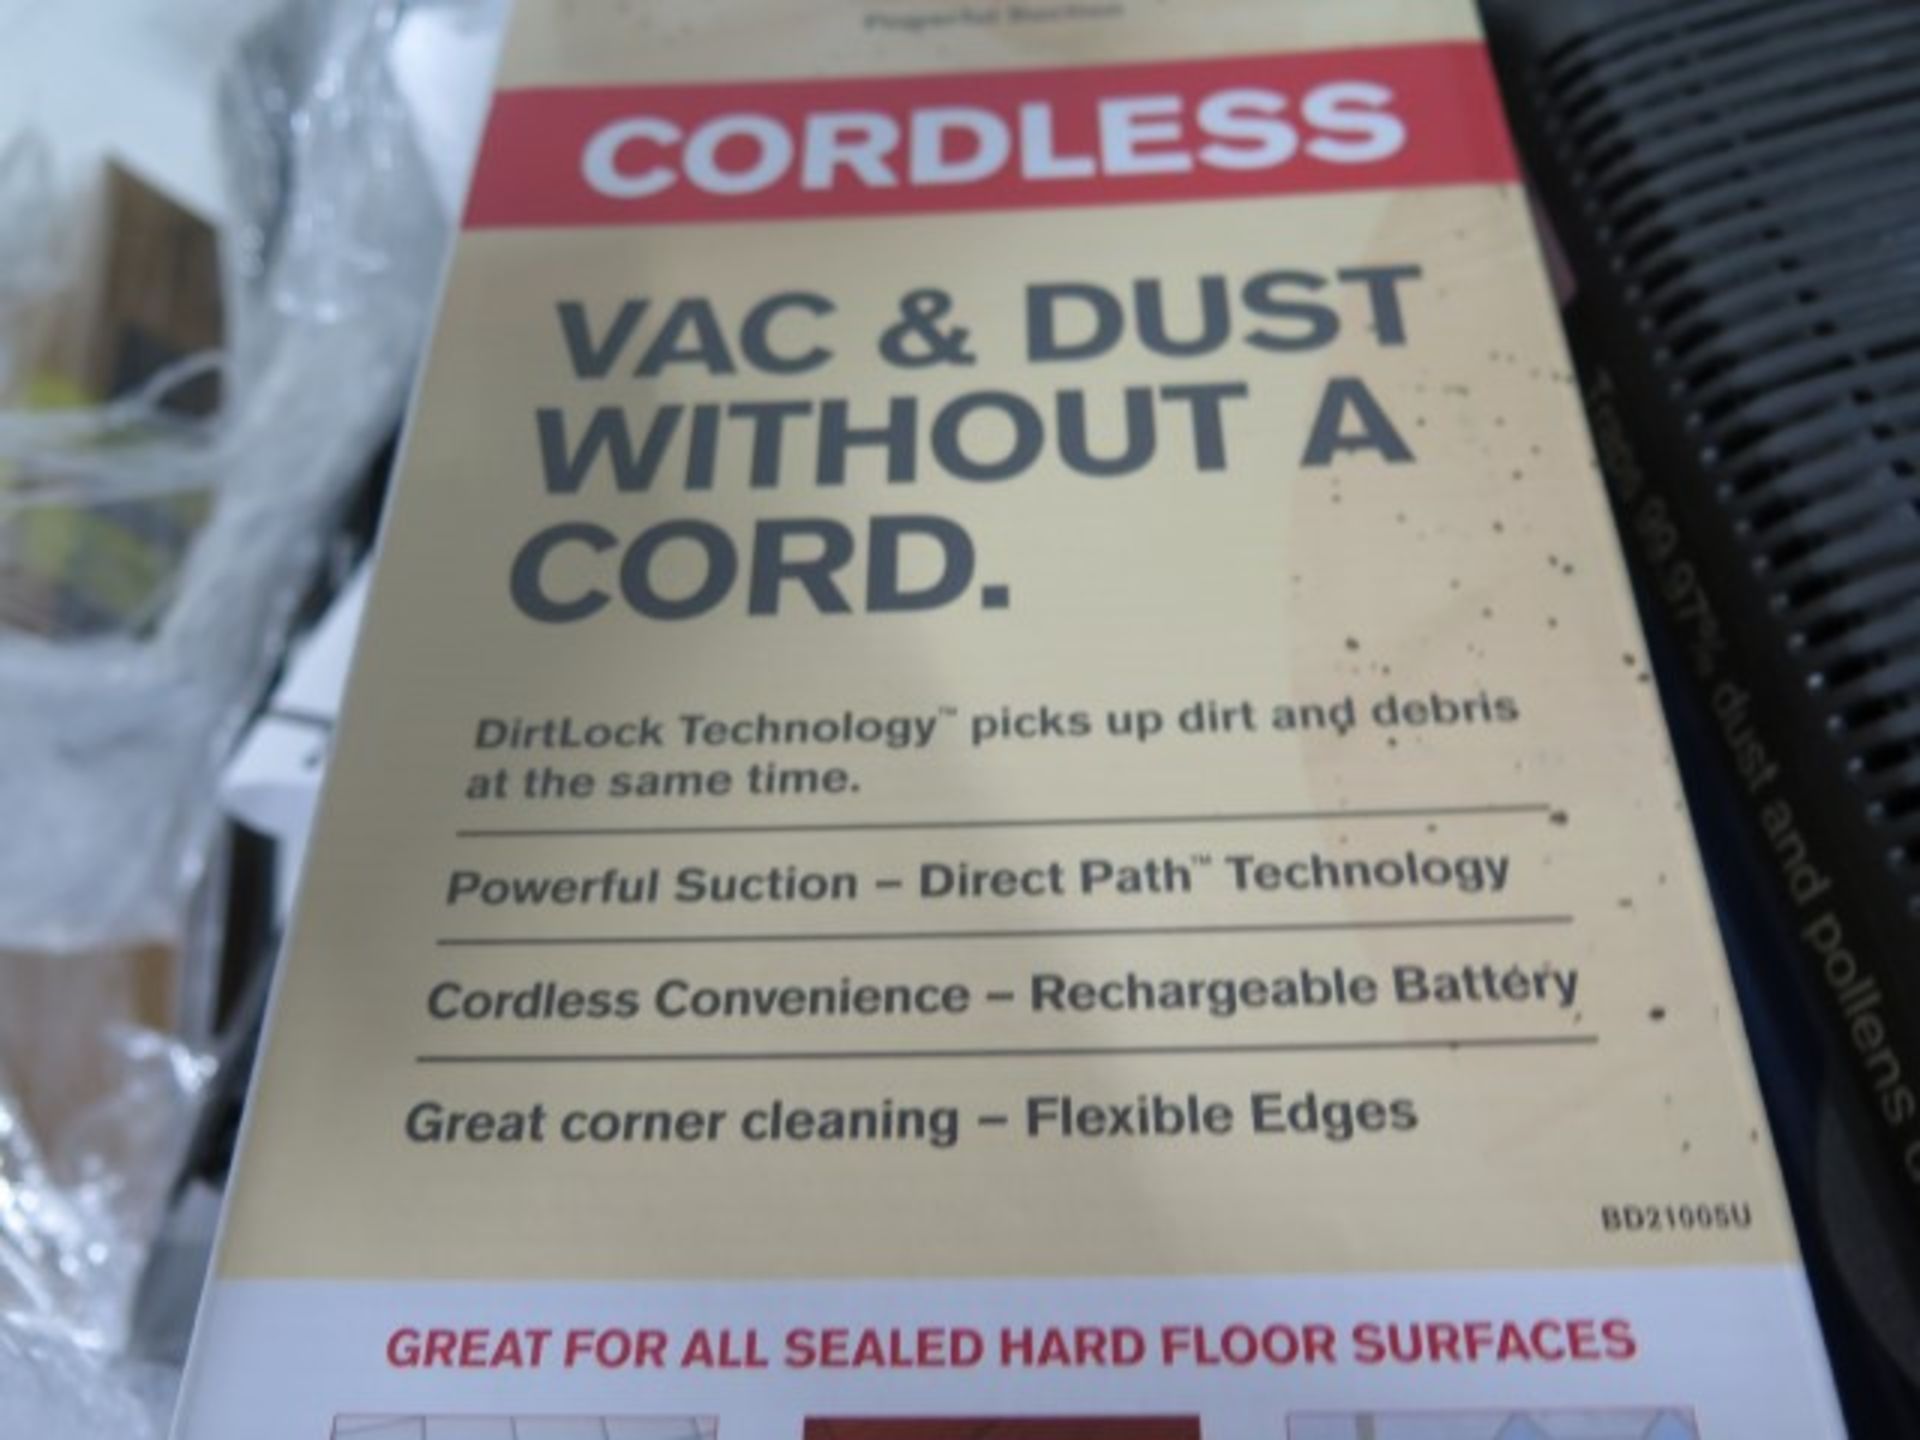 Lot of Vacuums with $1823 ESTIMATED retail value. Lot includesDirt Devil VacuumBissell Carpet